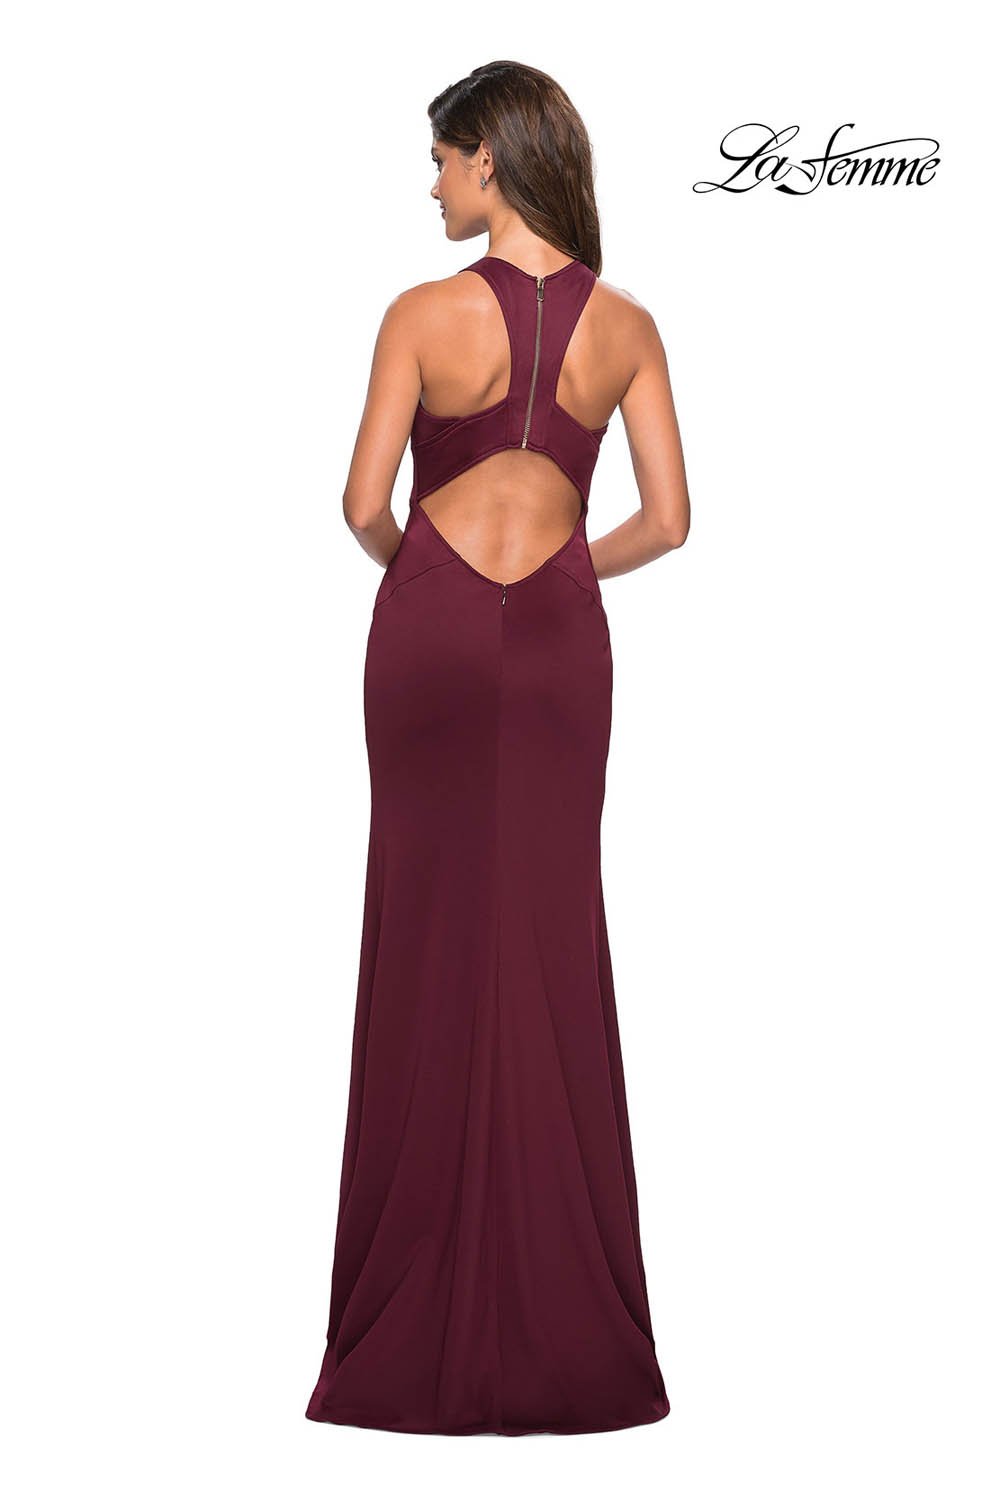 La Femme 27573 dress images in these colors: Gunmetal, Wine.